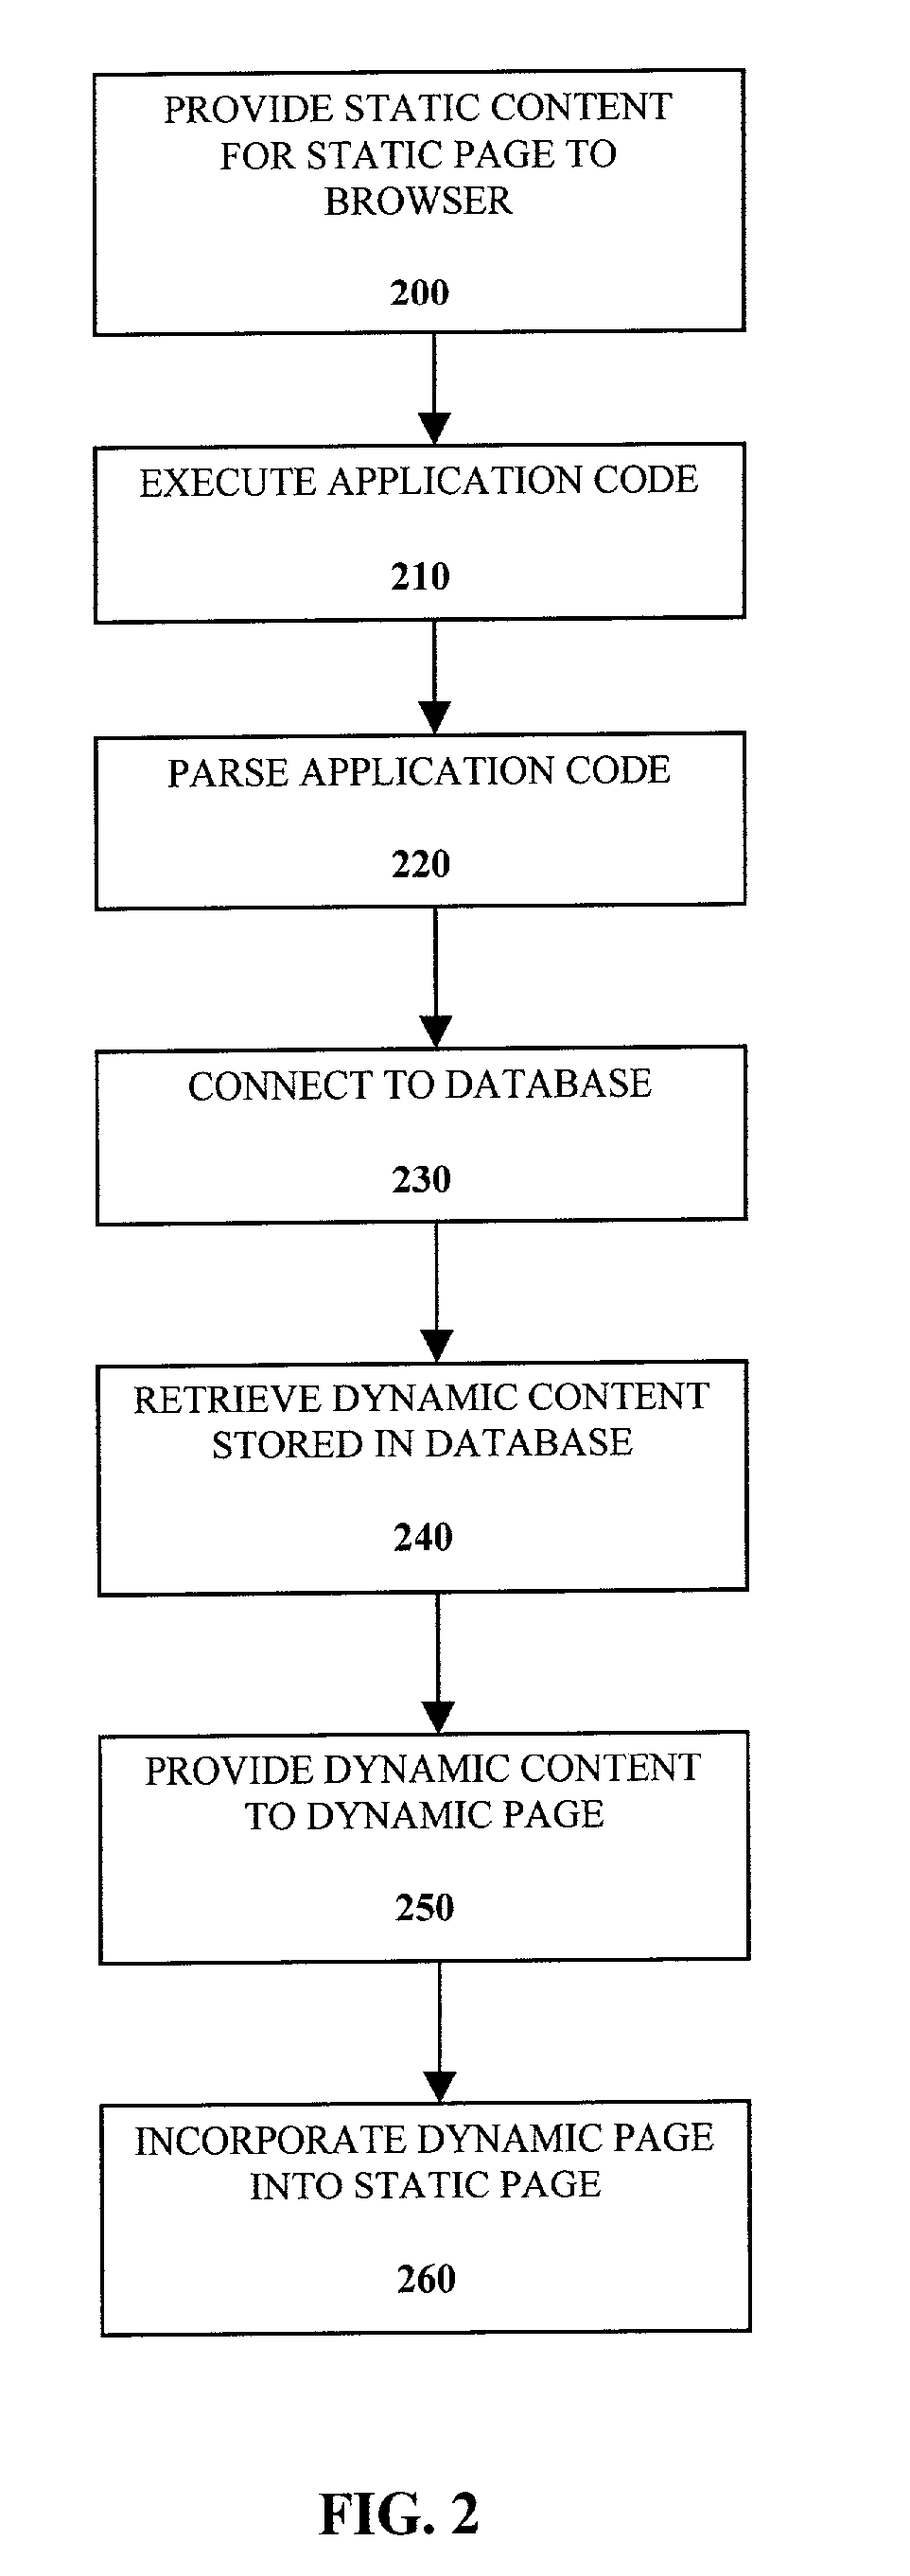 Dynamic content delivery to static page in non-application capable environment